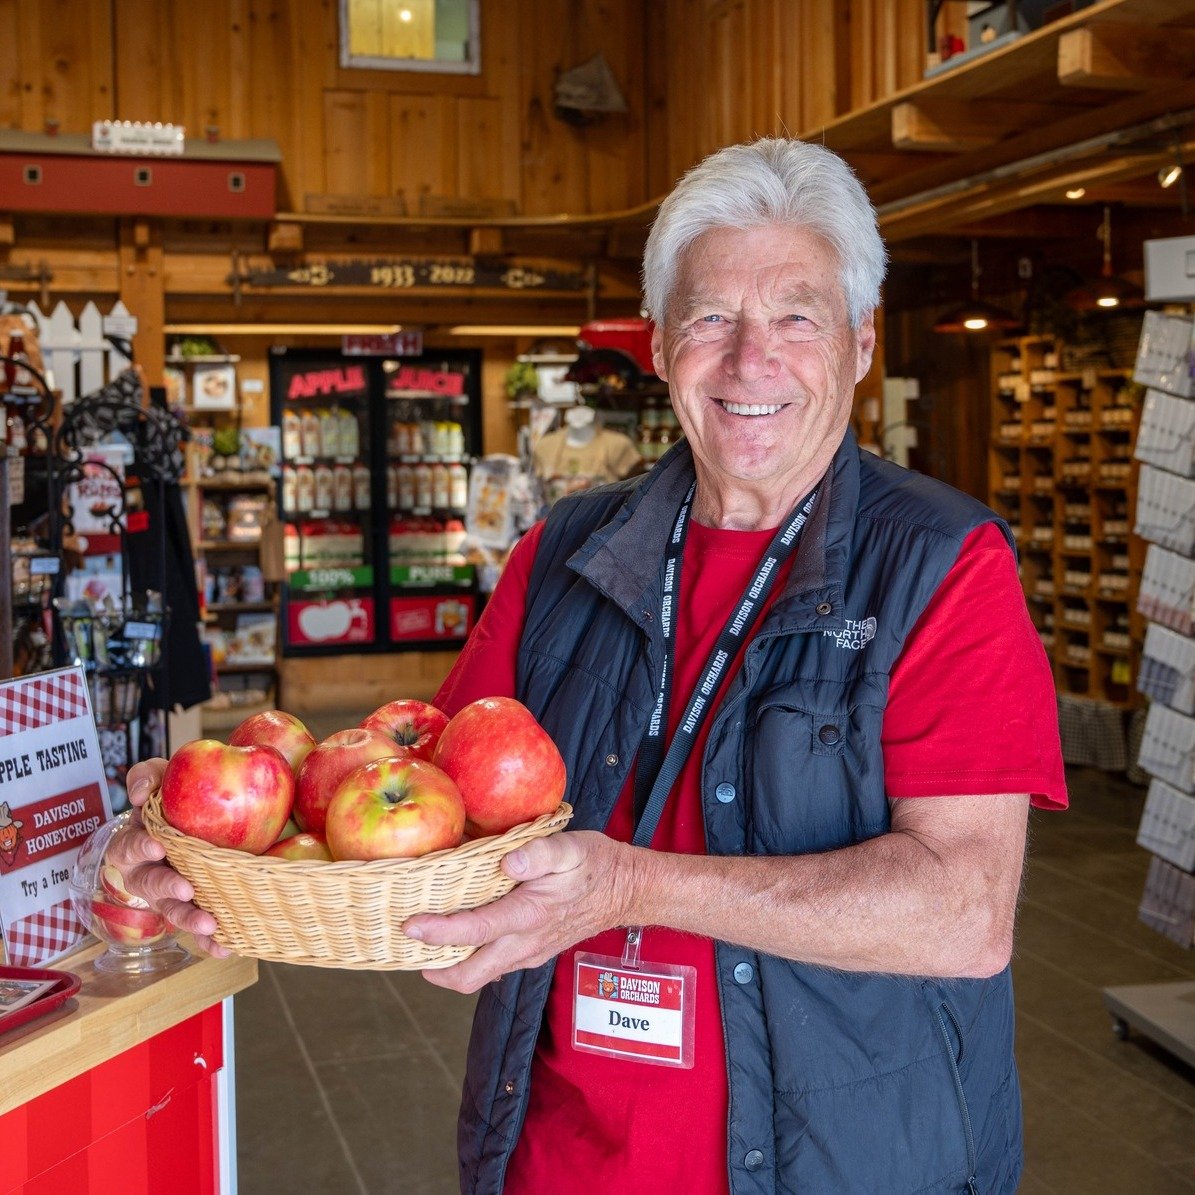 We are open tomorrow! From 9 to 5.30 
This is Dave, and he is in charge of providing free samples of our crisp &amp; juicy Davison Honeycrisp Apples. 
Have you try one yet? They are truly delicious!🍎😋